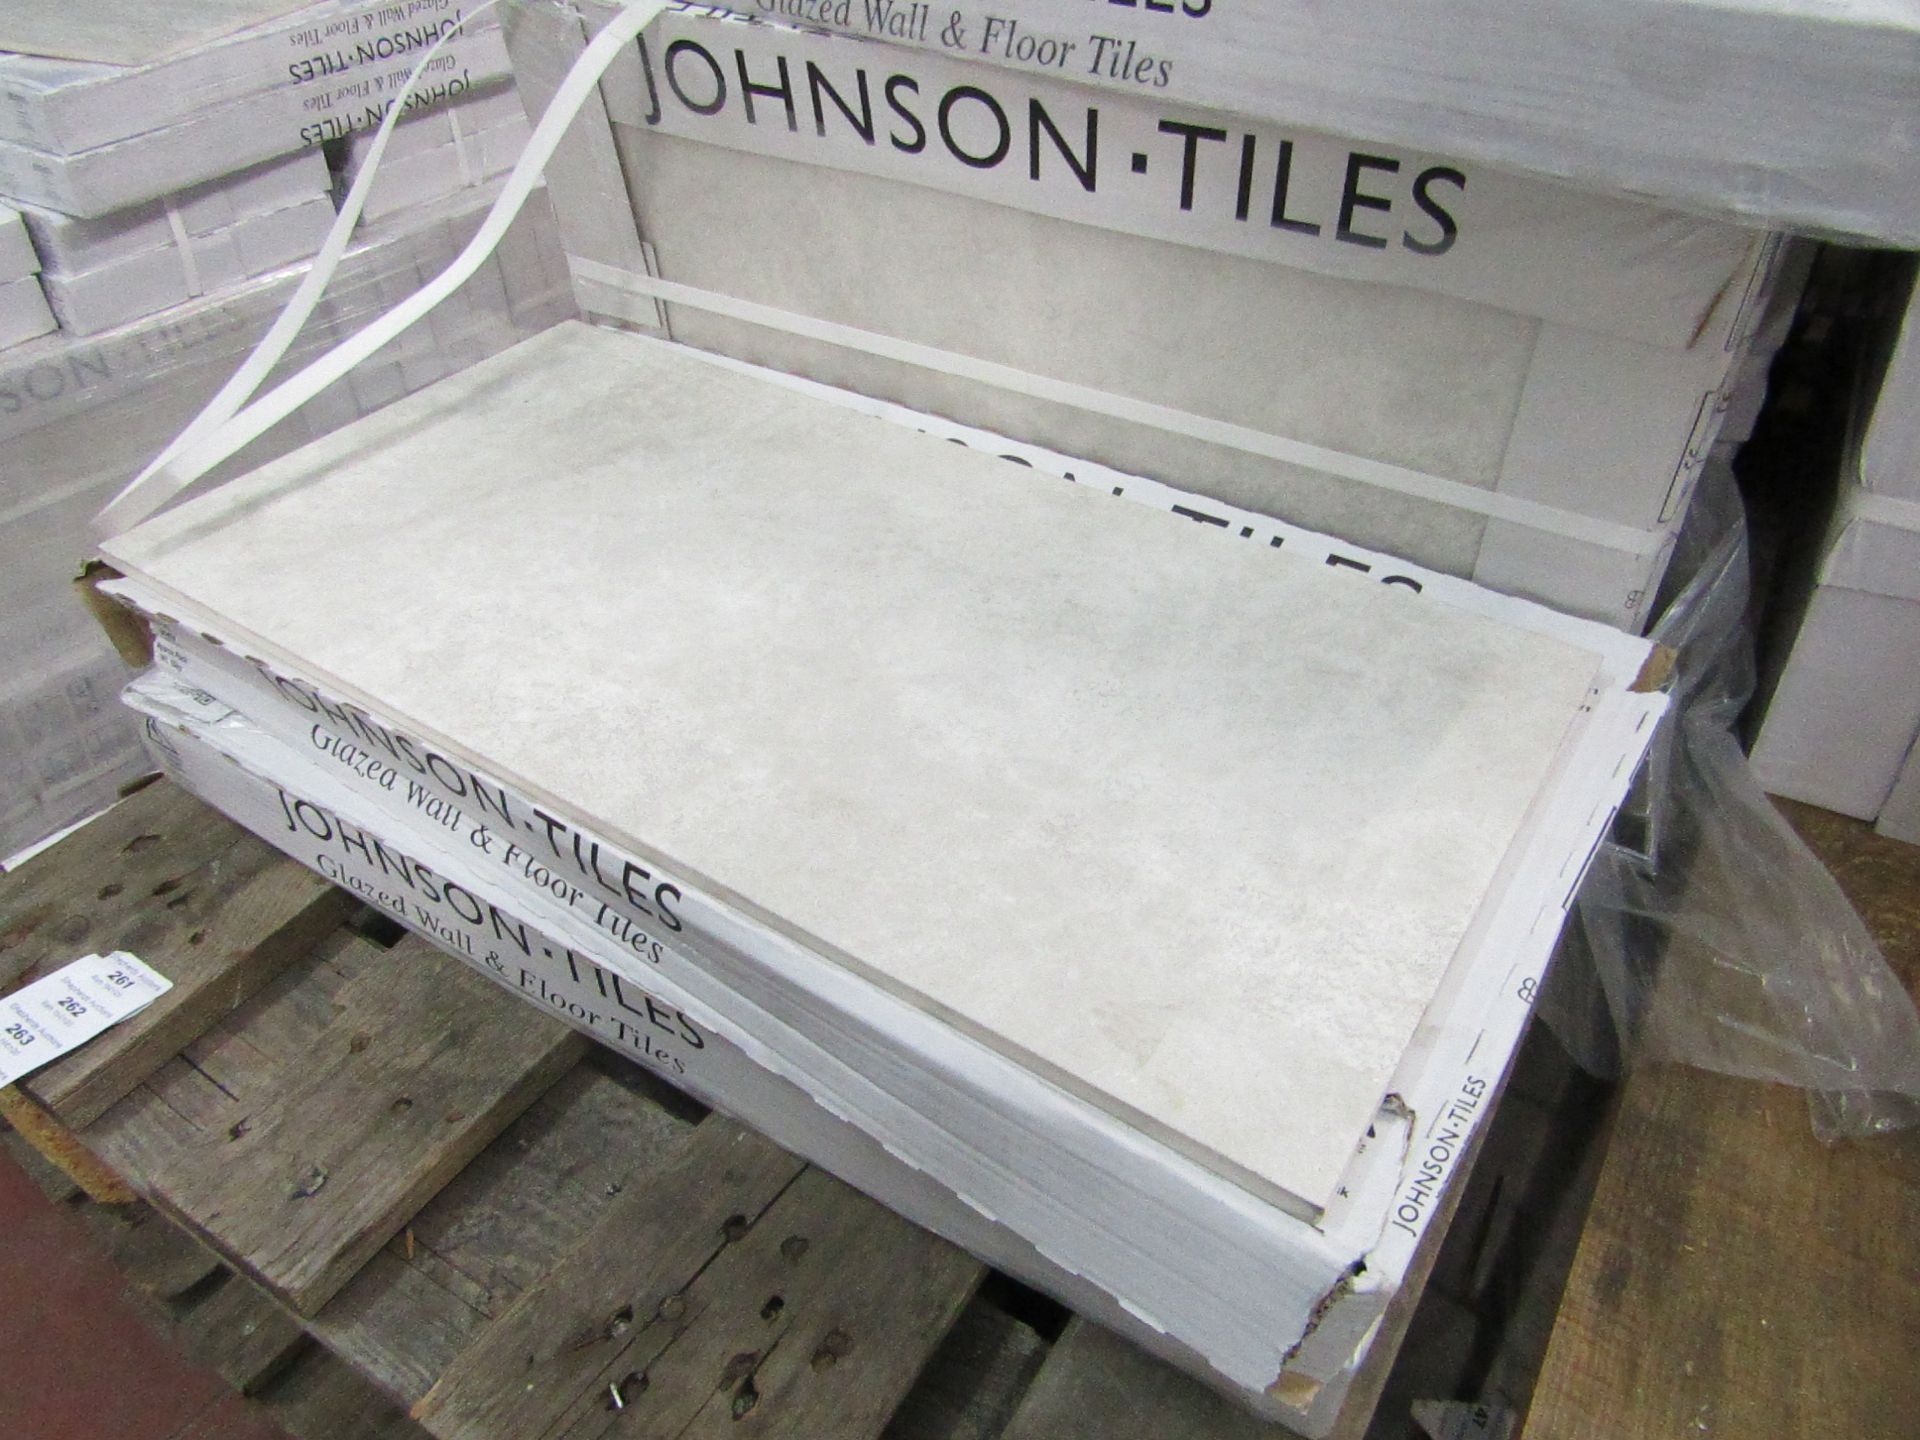 10x Packs of 5 Cambridge Classic 300x600 wall and Floor Tiles By Johnsons, New, the RRP per pack